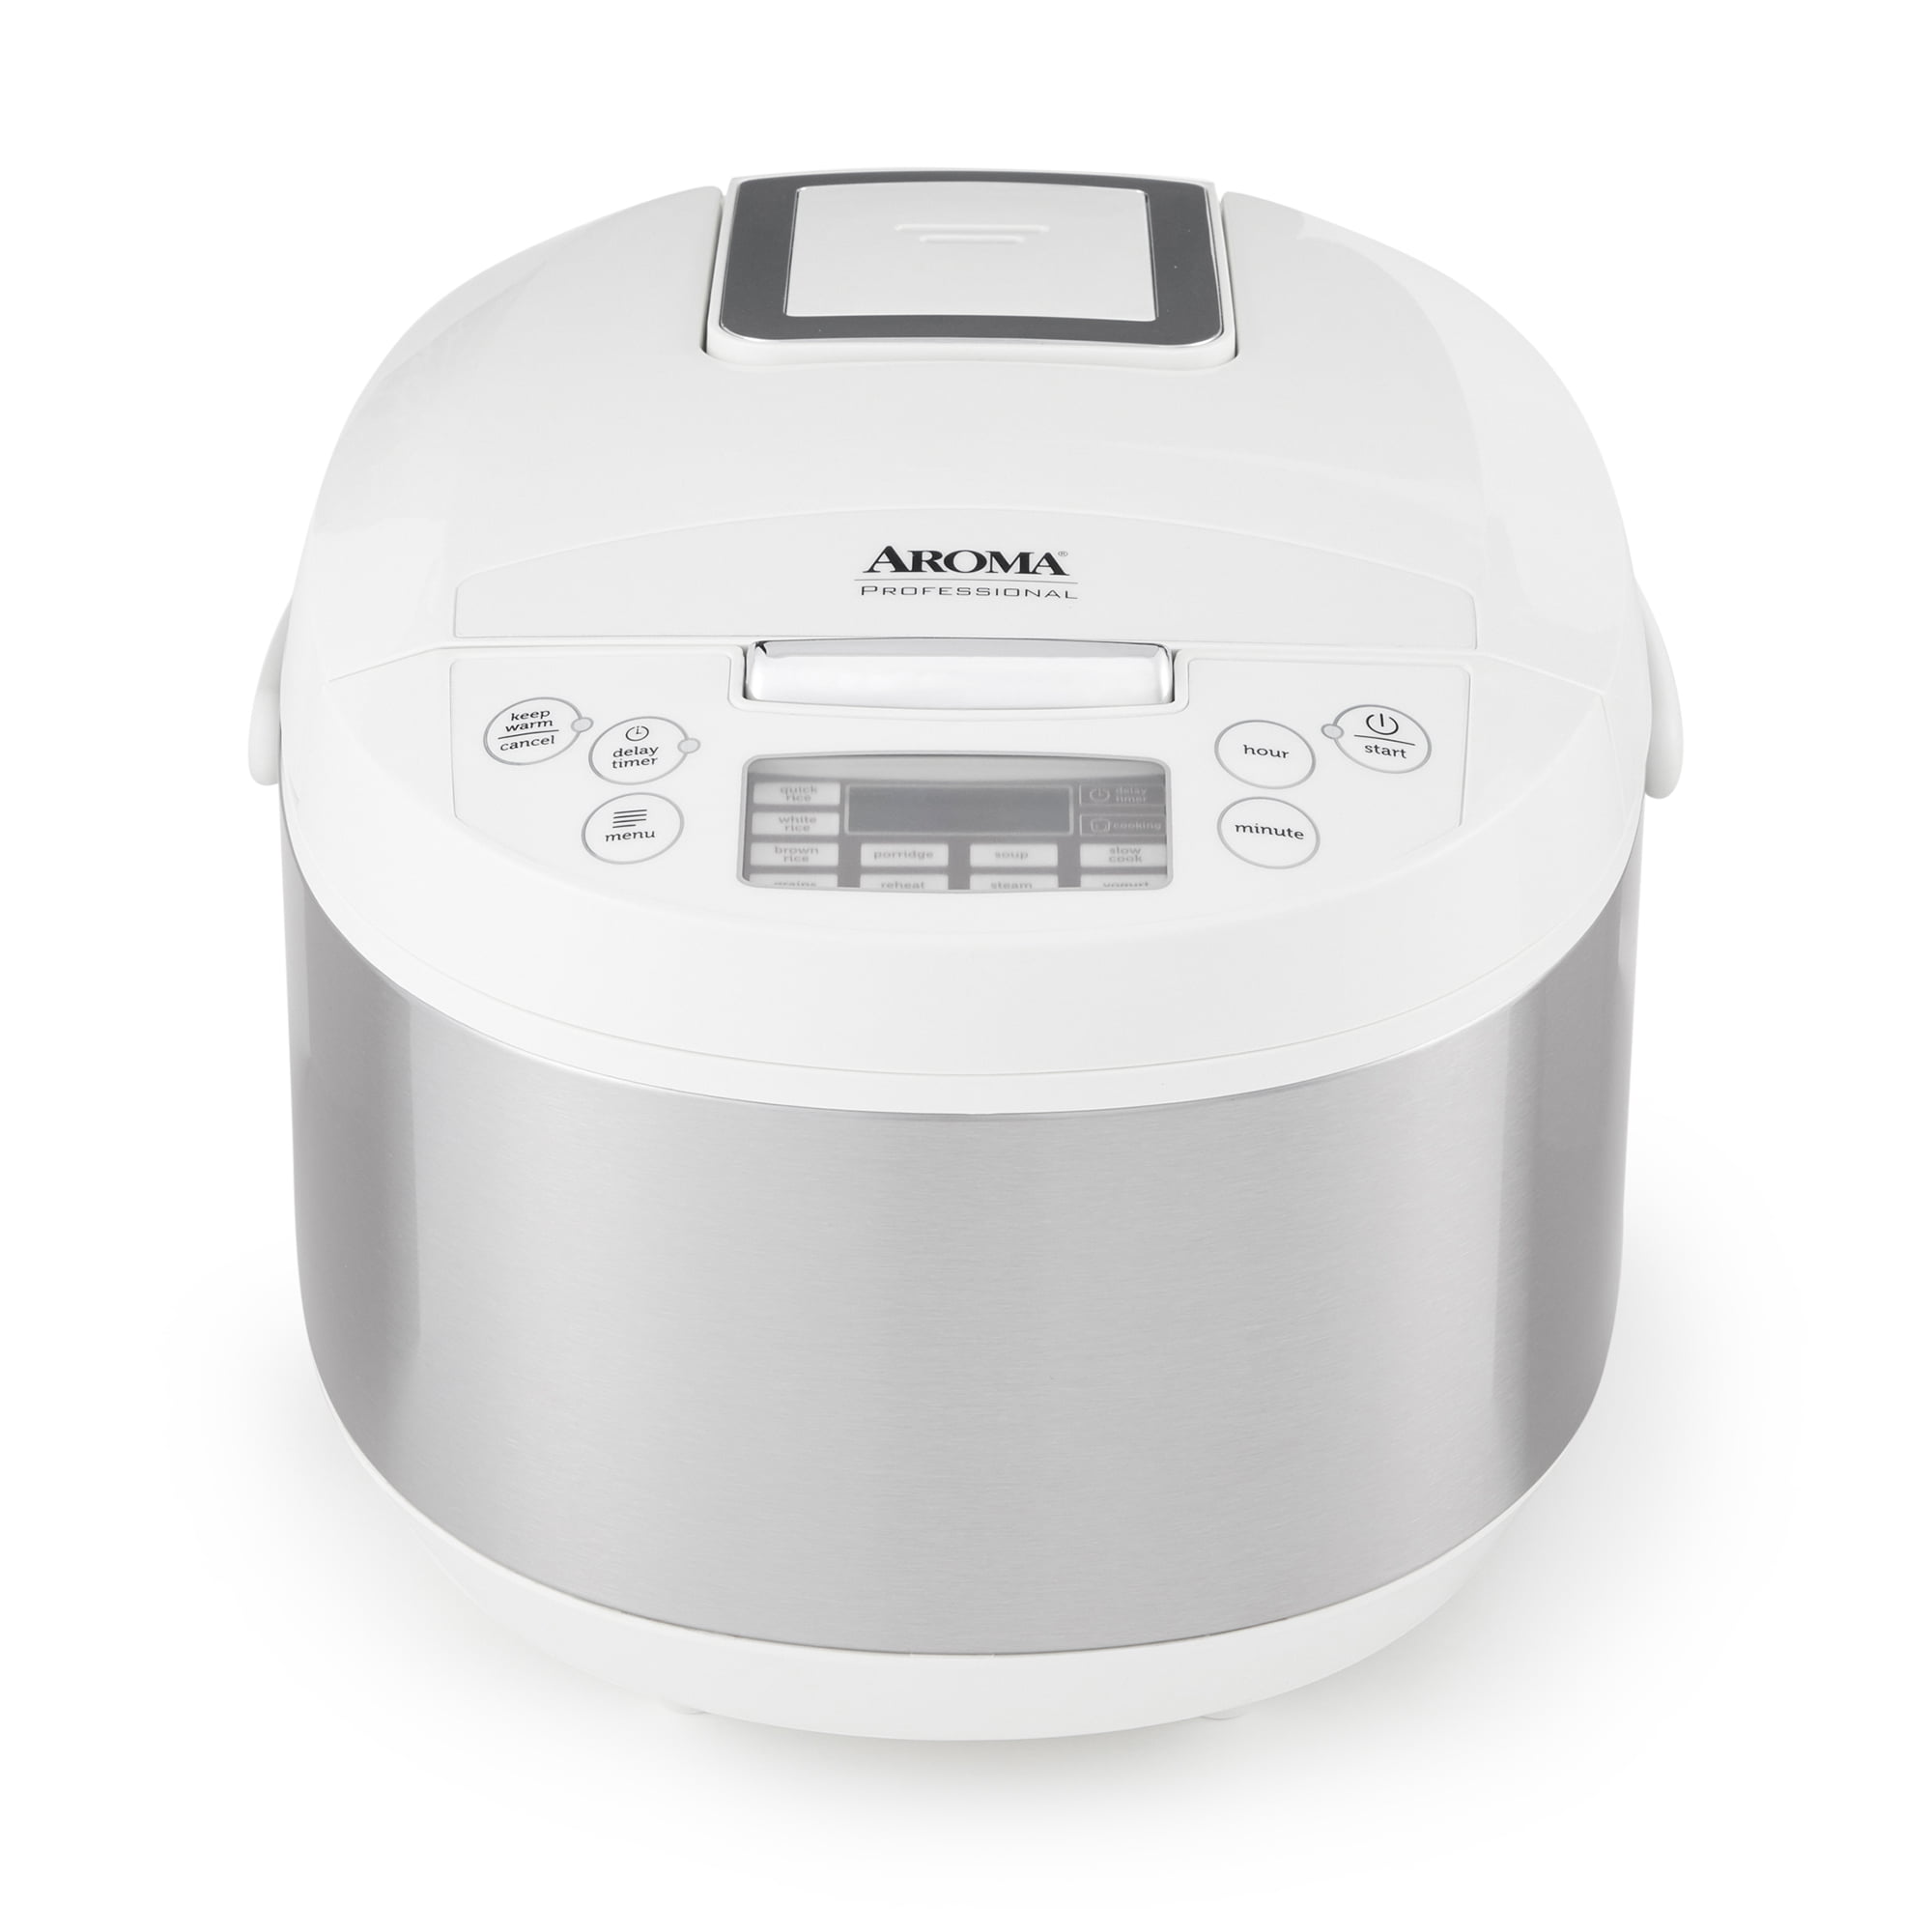 IAGREEA 4 Cup Kambrook Electric Pressure Cooker With 8 Menu Settings For  Fast White/Brown Rice, Oatmeal, And More Portable Multi Cooker From  Juulpod, $65.26